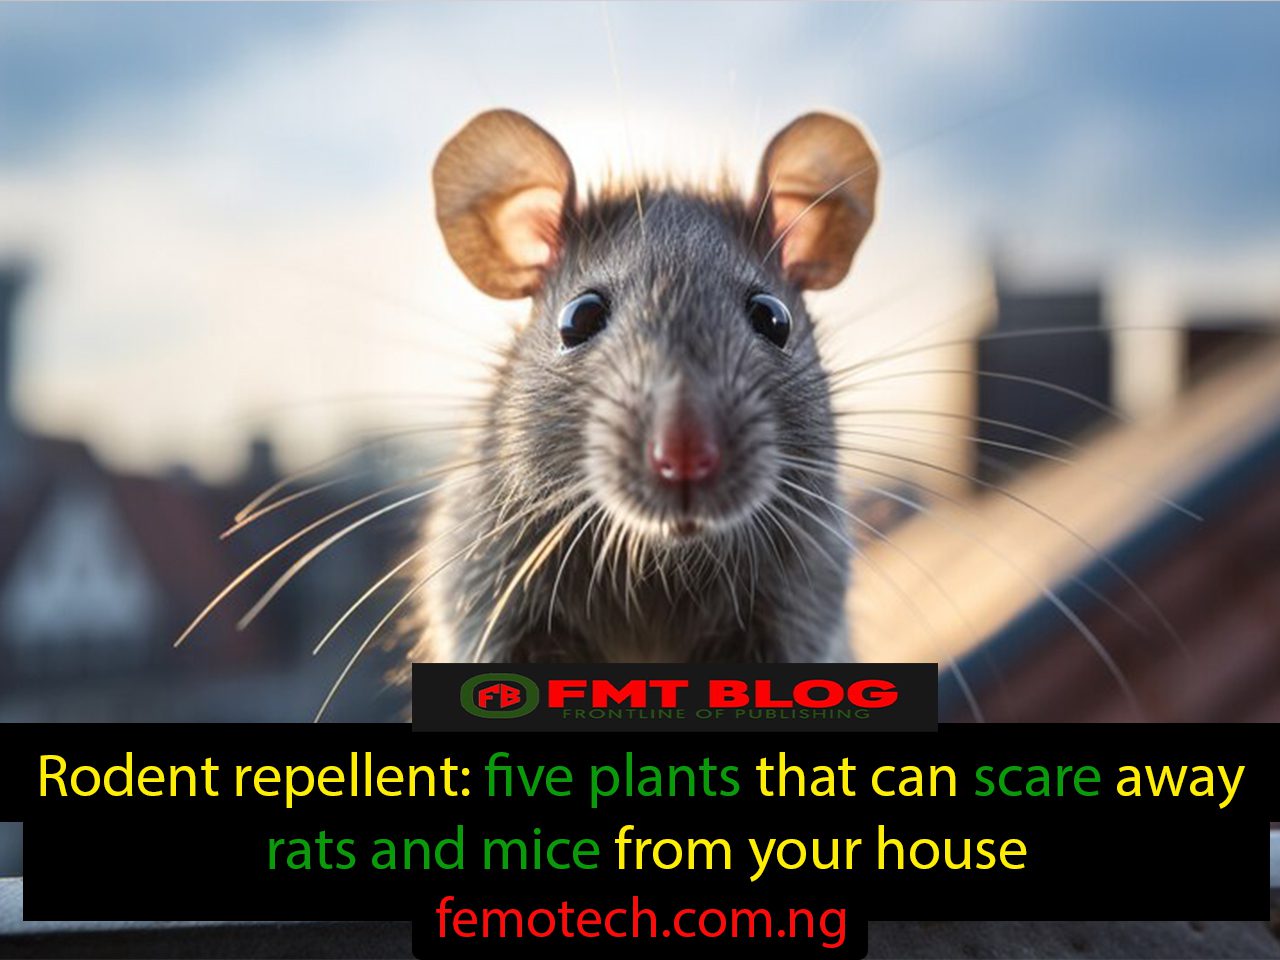 Rodent repellent: 4 plants that can scare away rats and mice from your house